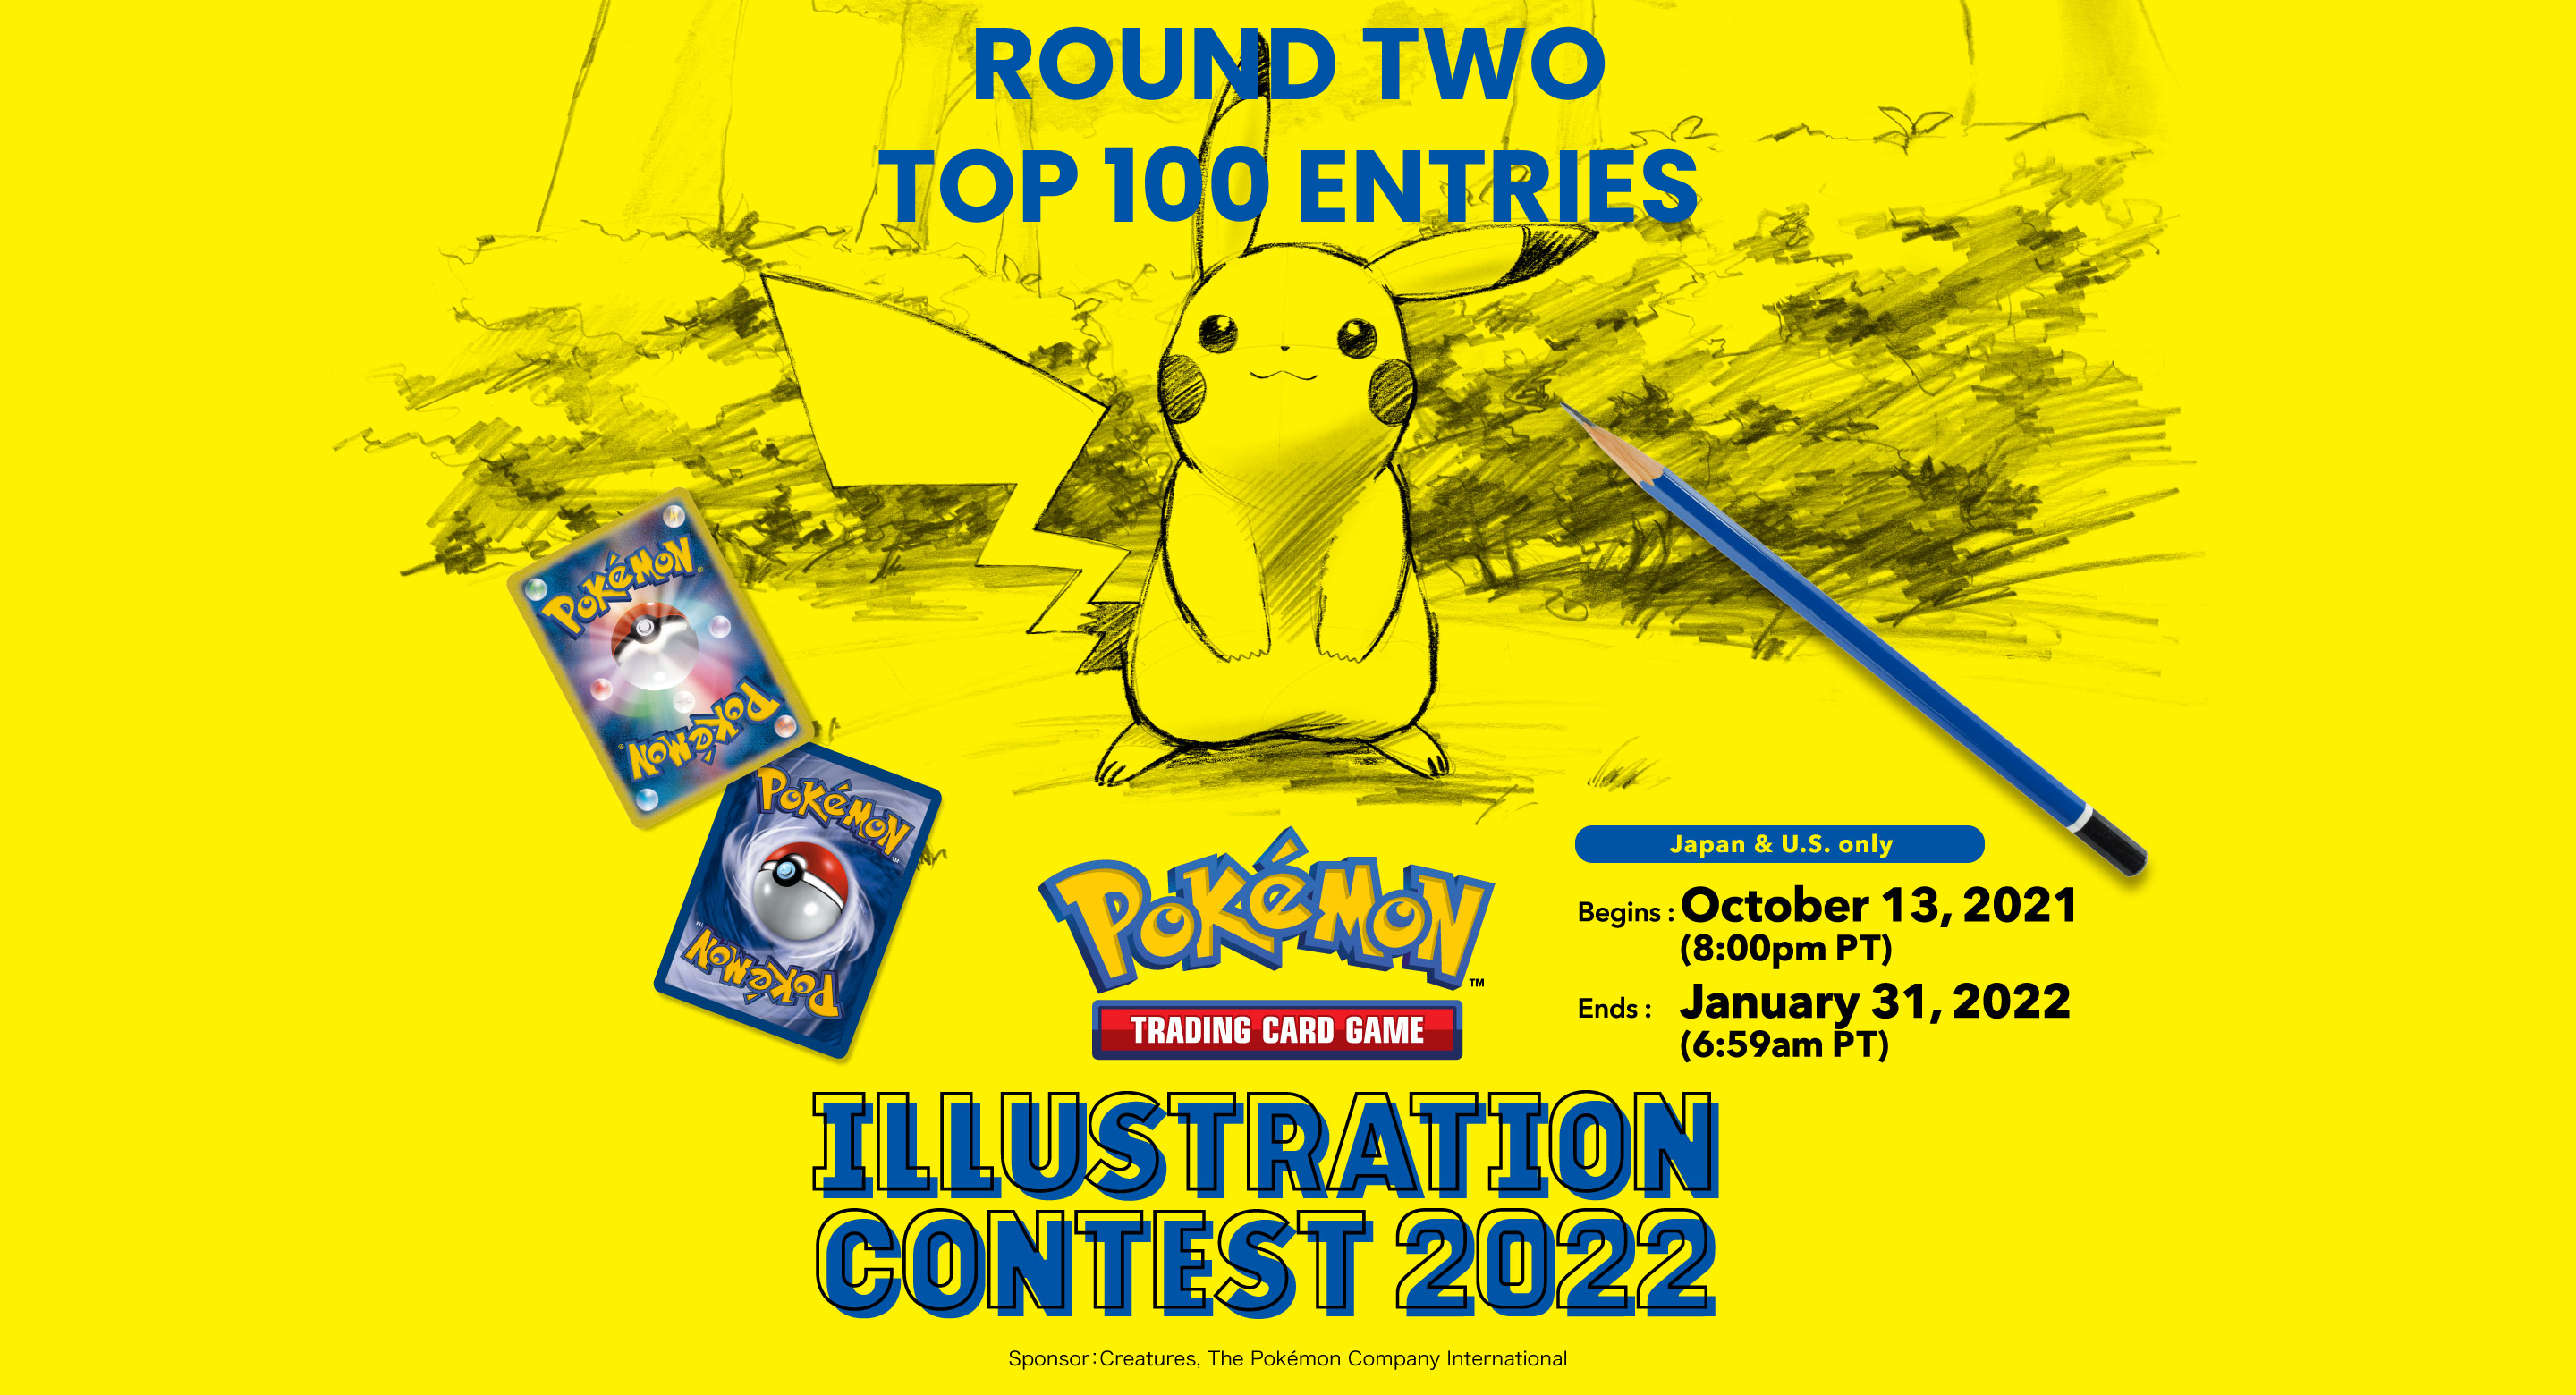 Pokémon Trading Card Game Illustration Contest 2022. – Round Two – Top 100